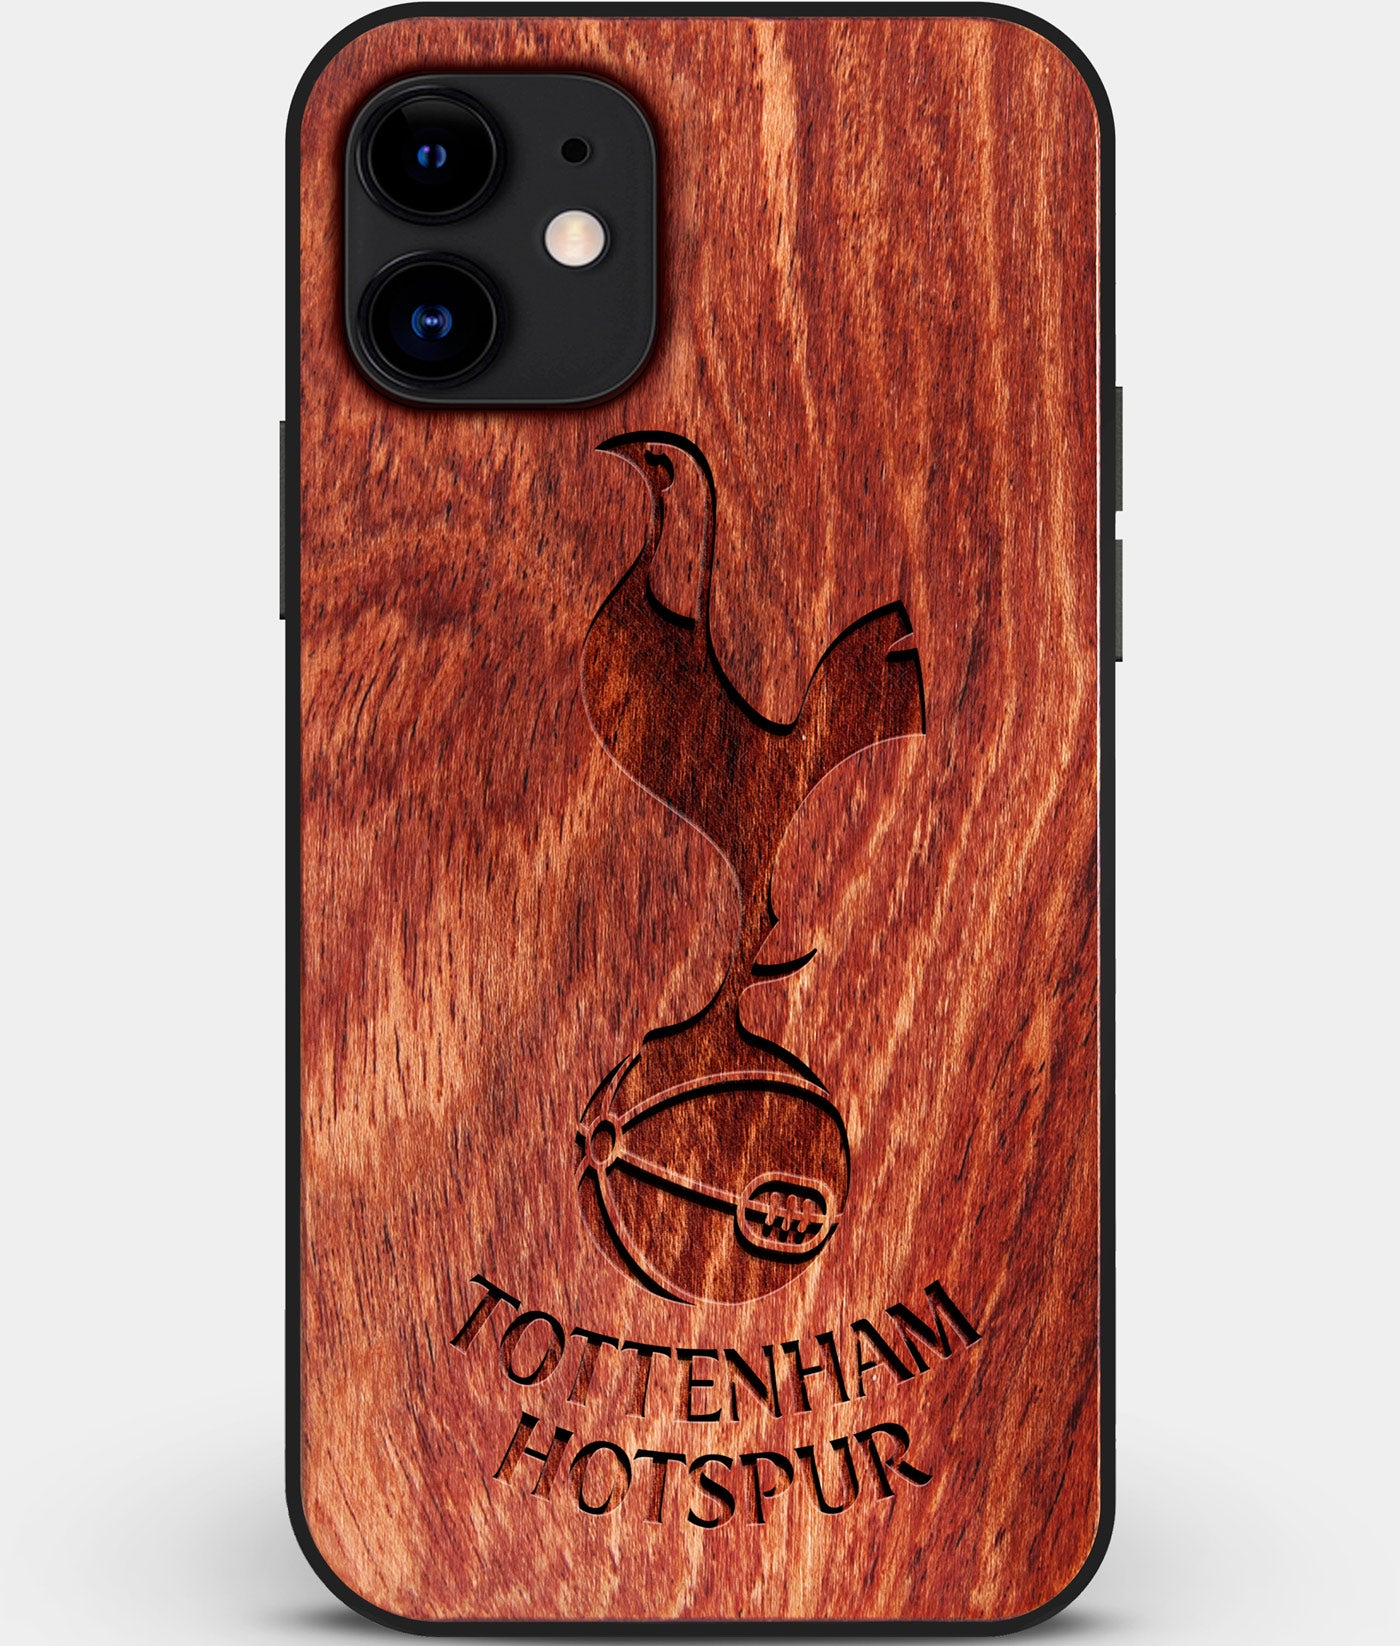 Custom Carved Wood Tottenham Hotspur F.C. iPhone 12 Case | Personalized Mahogany Wood Tottenham Hotspur F.C. Cover, Birthday Gift, Gifts For Him, Monogrammed Gift For Fan | by Engraved In Nature